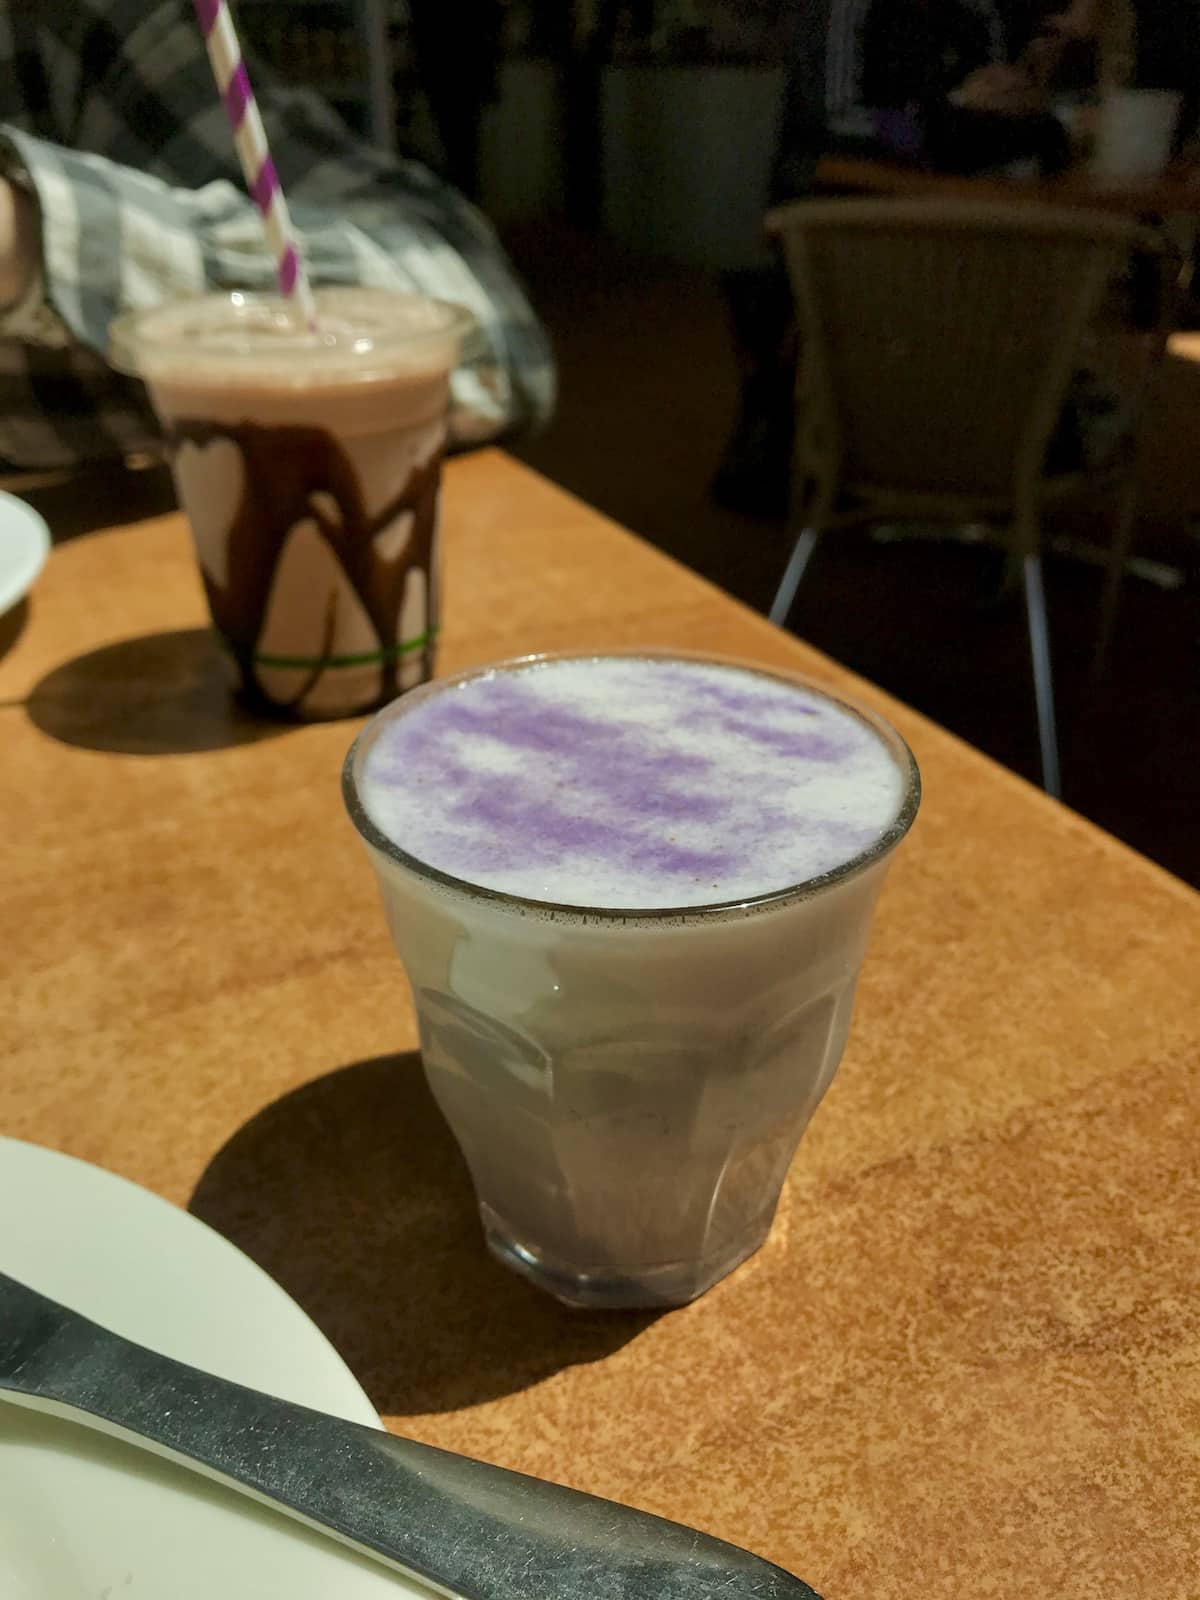 A glass cup with a milky drink of a light purple colour, sitting on a table in the afternoon sun